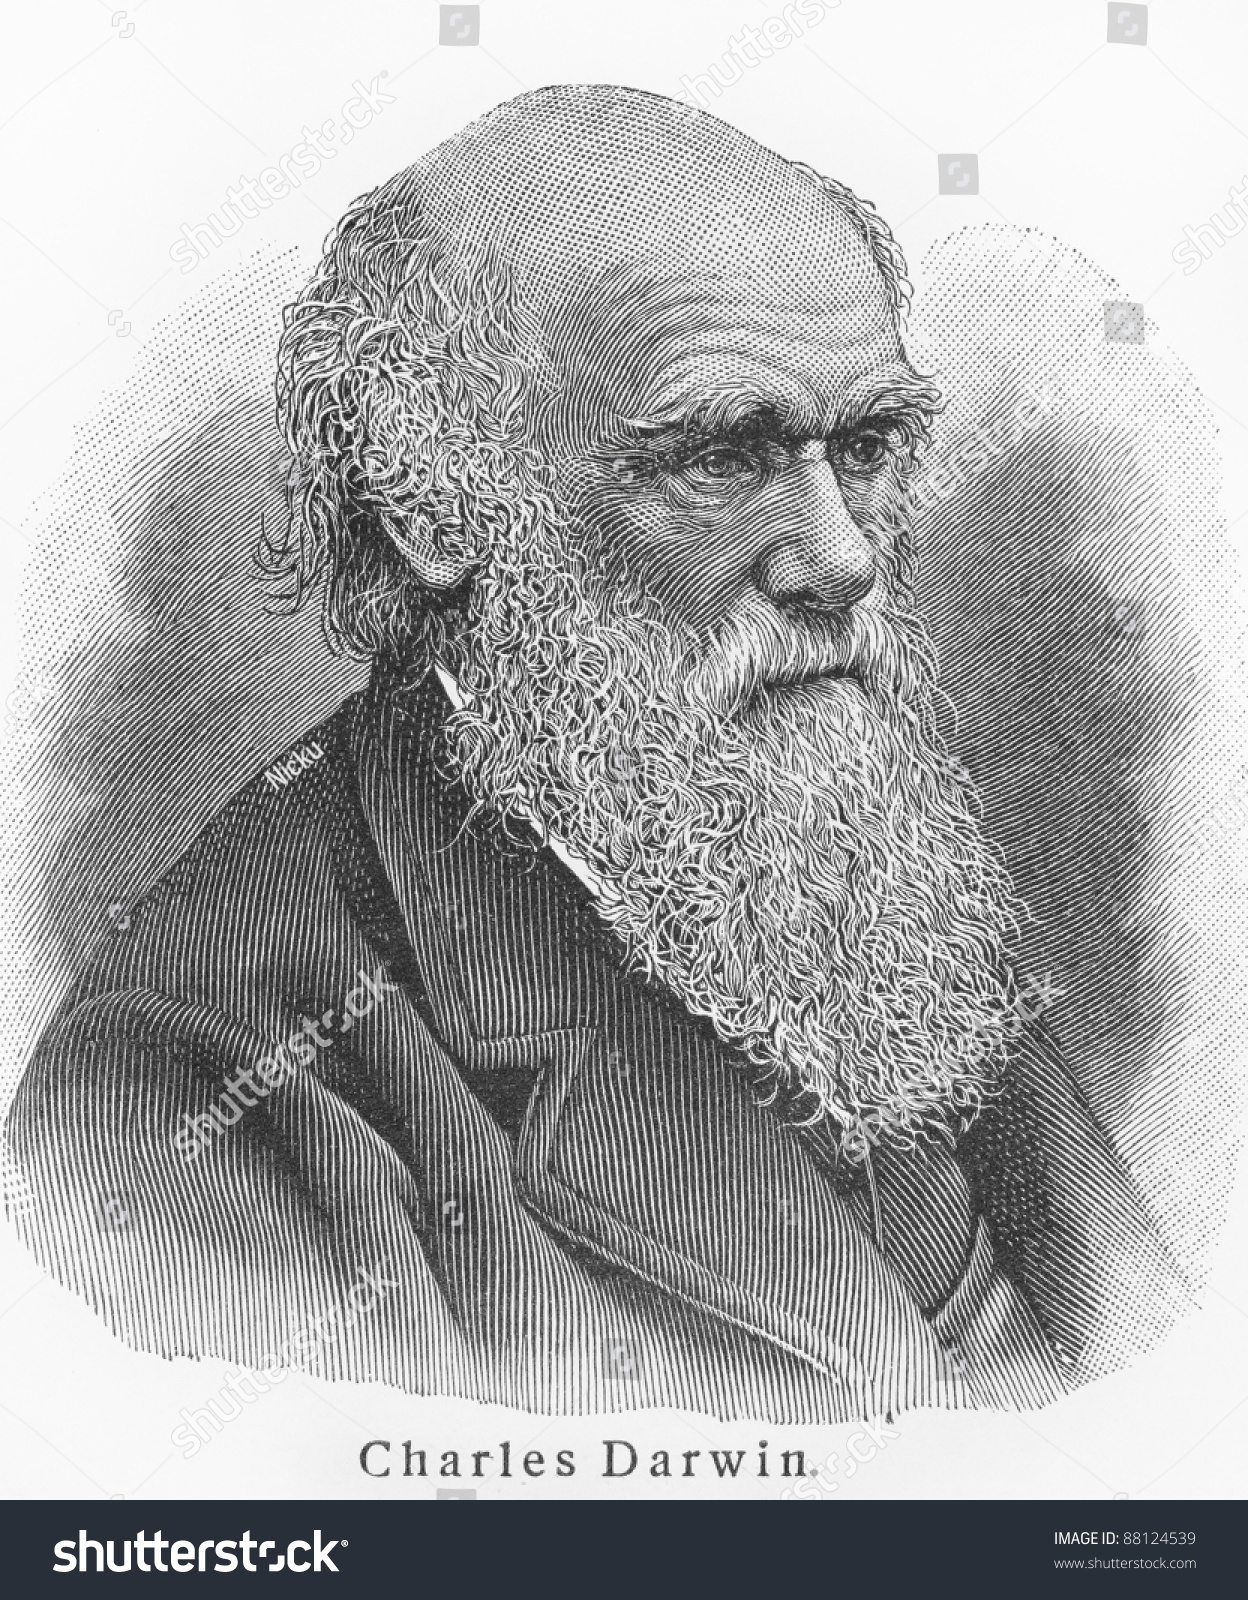 113 Darwin drawings Stock Photos, Images & Photography Shutterstock